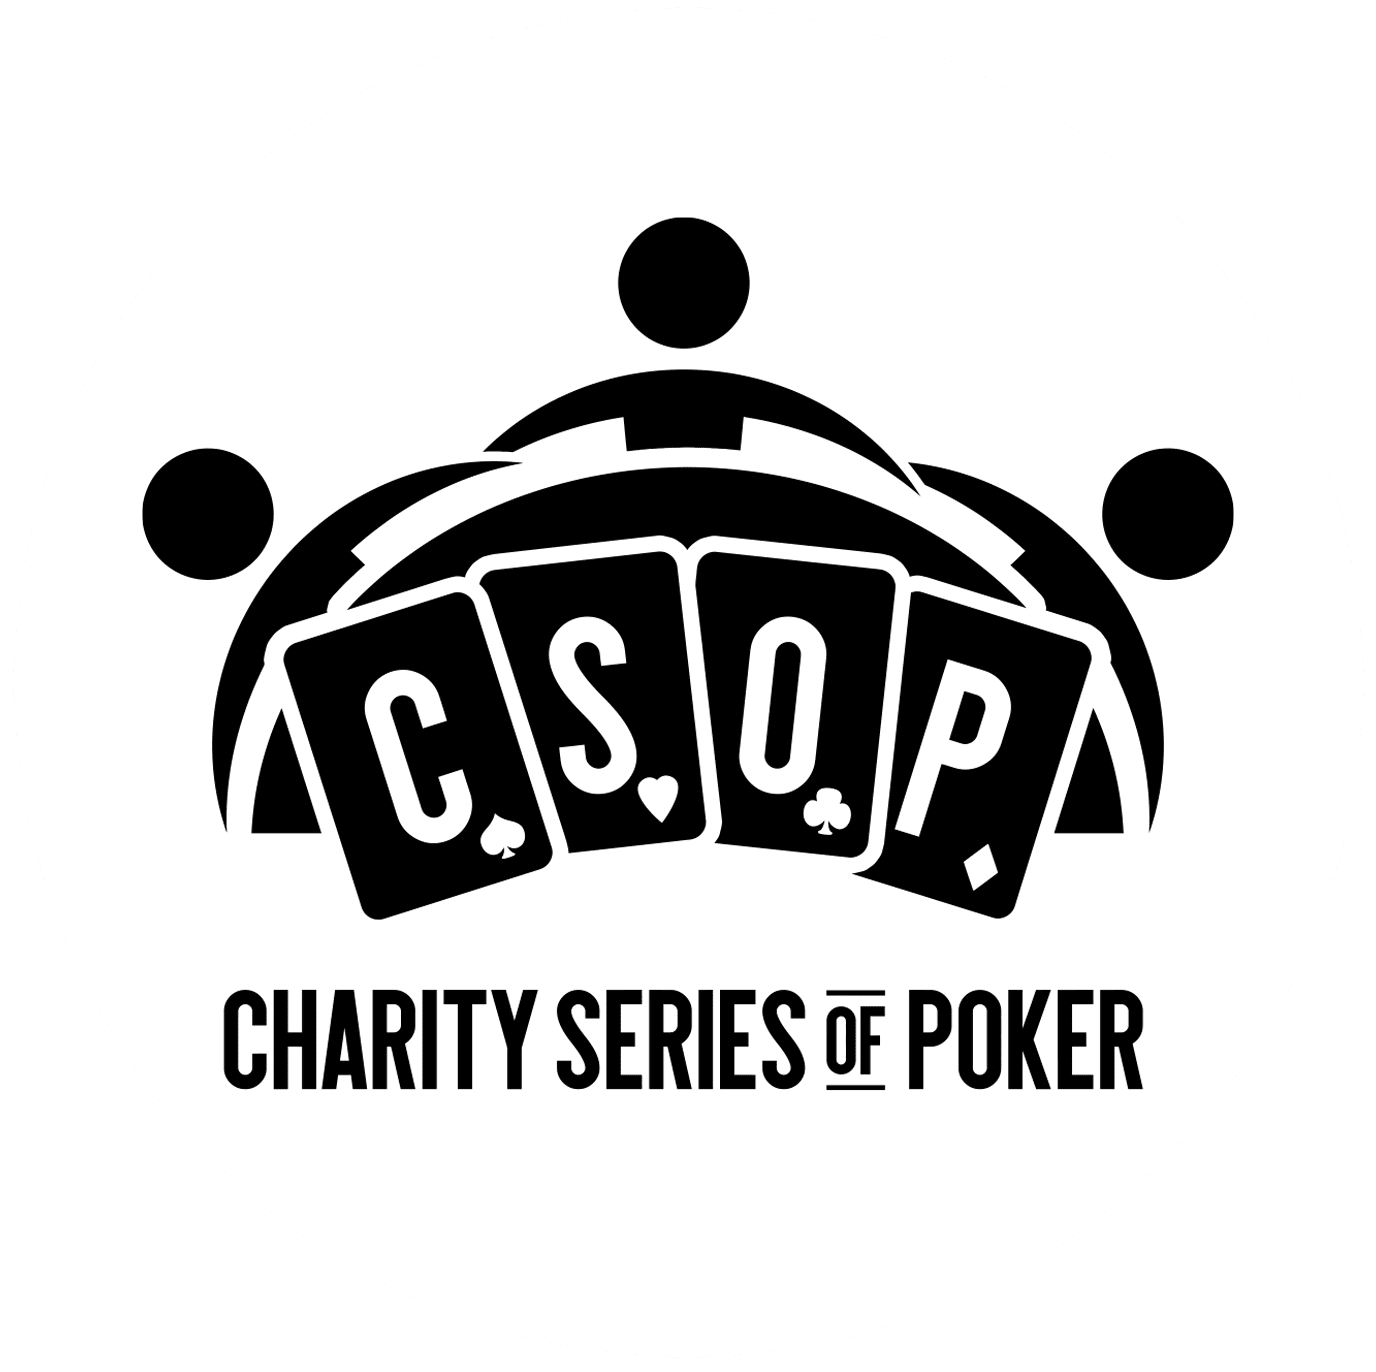 Charity Series of Poker